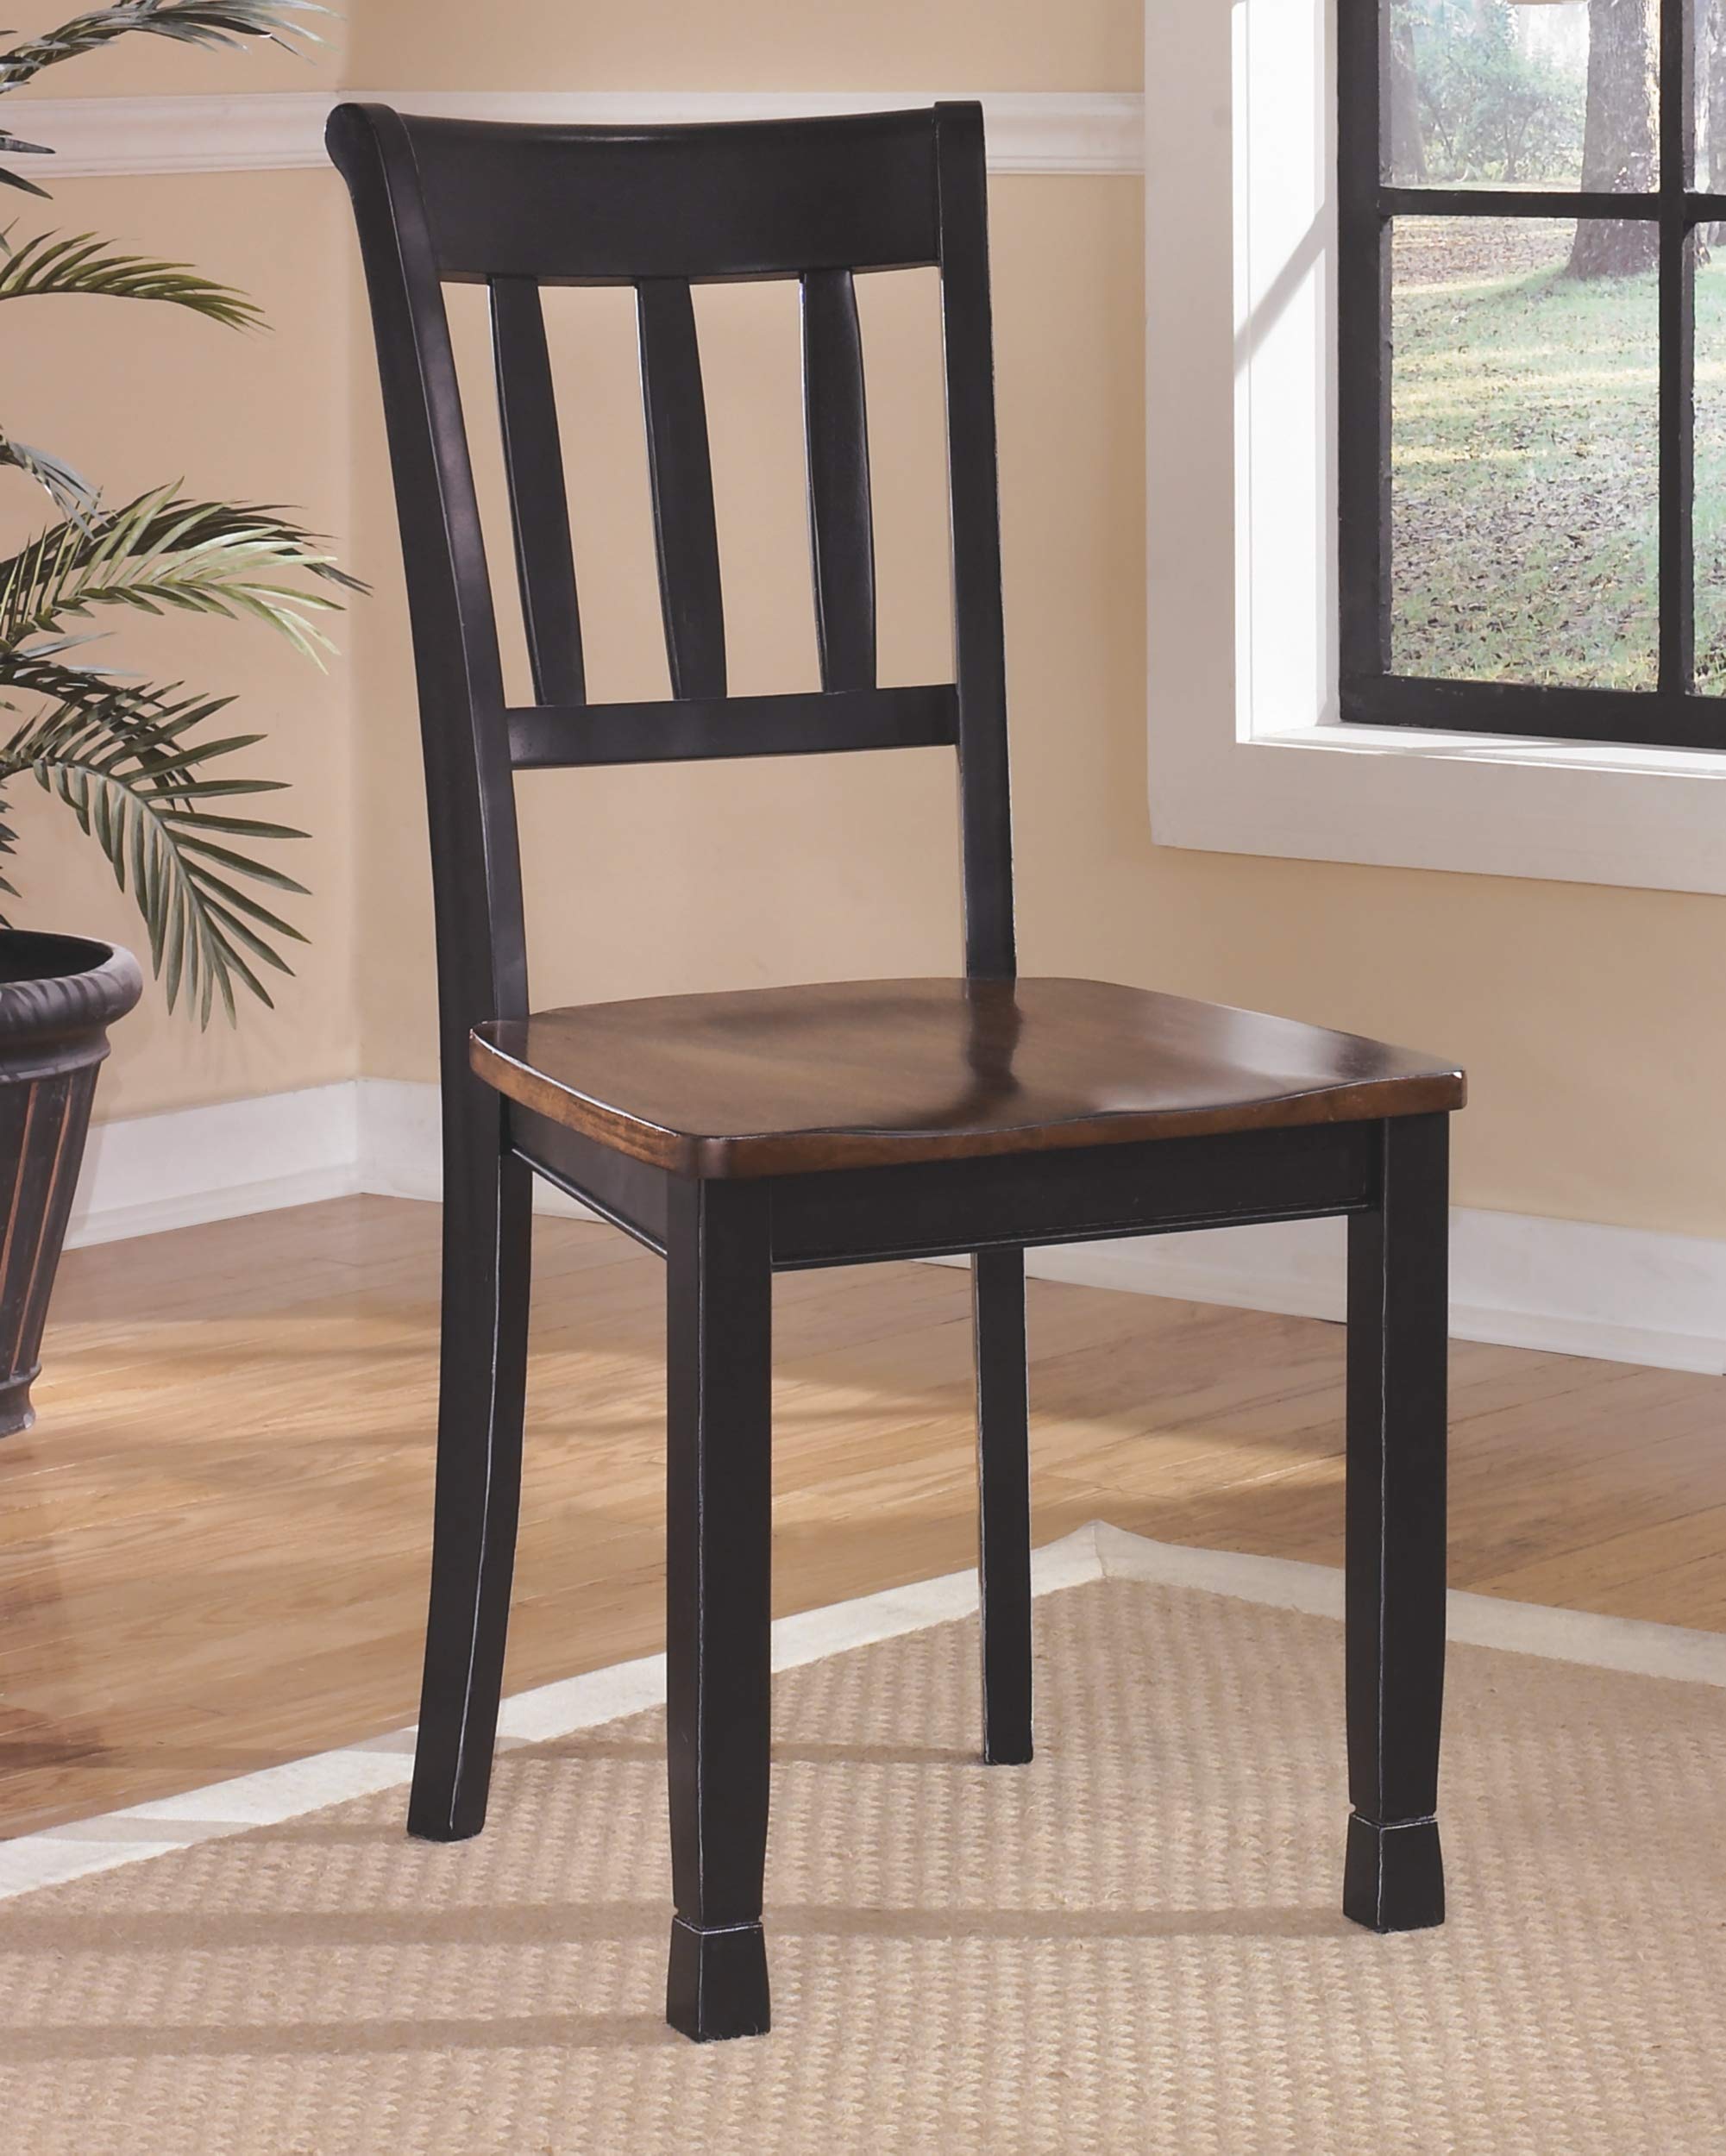 Owingsville Modern Farmhouse Dining Room Side Chair, 2 Count, Black and Brown